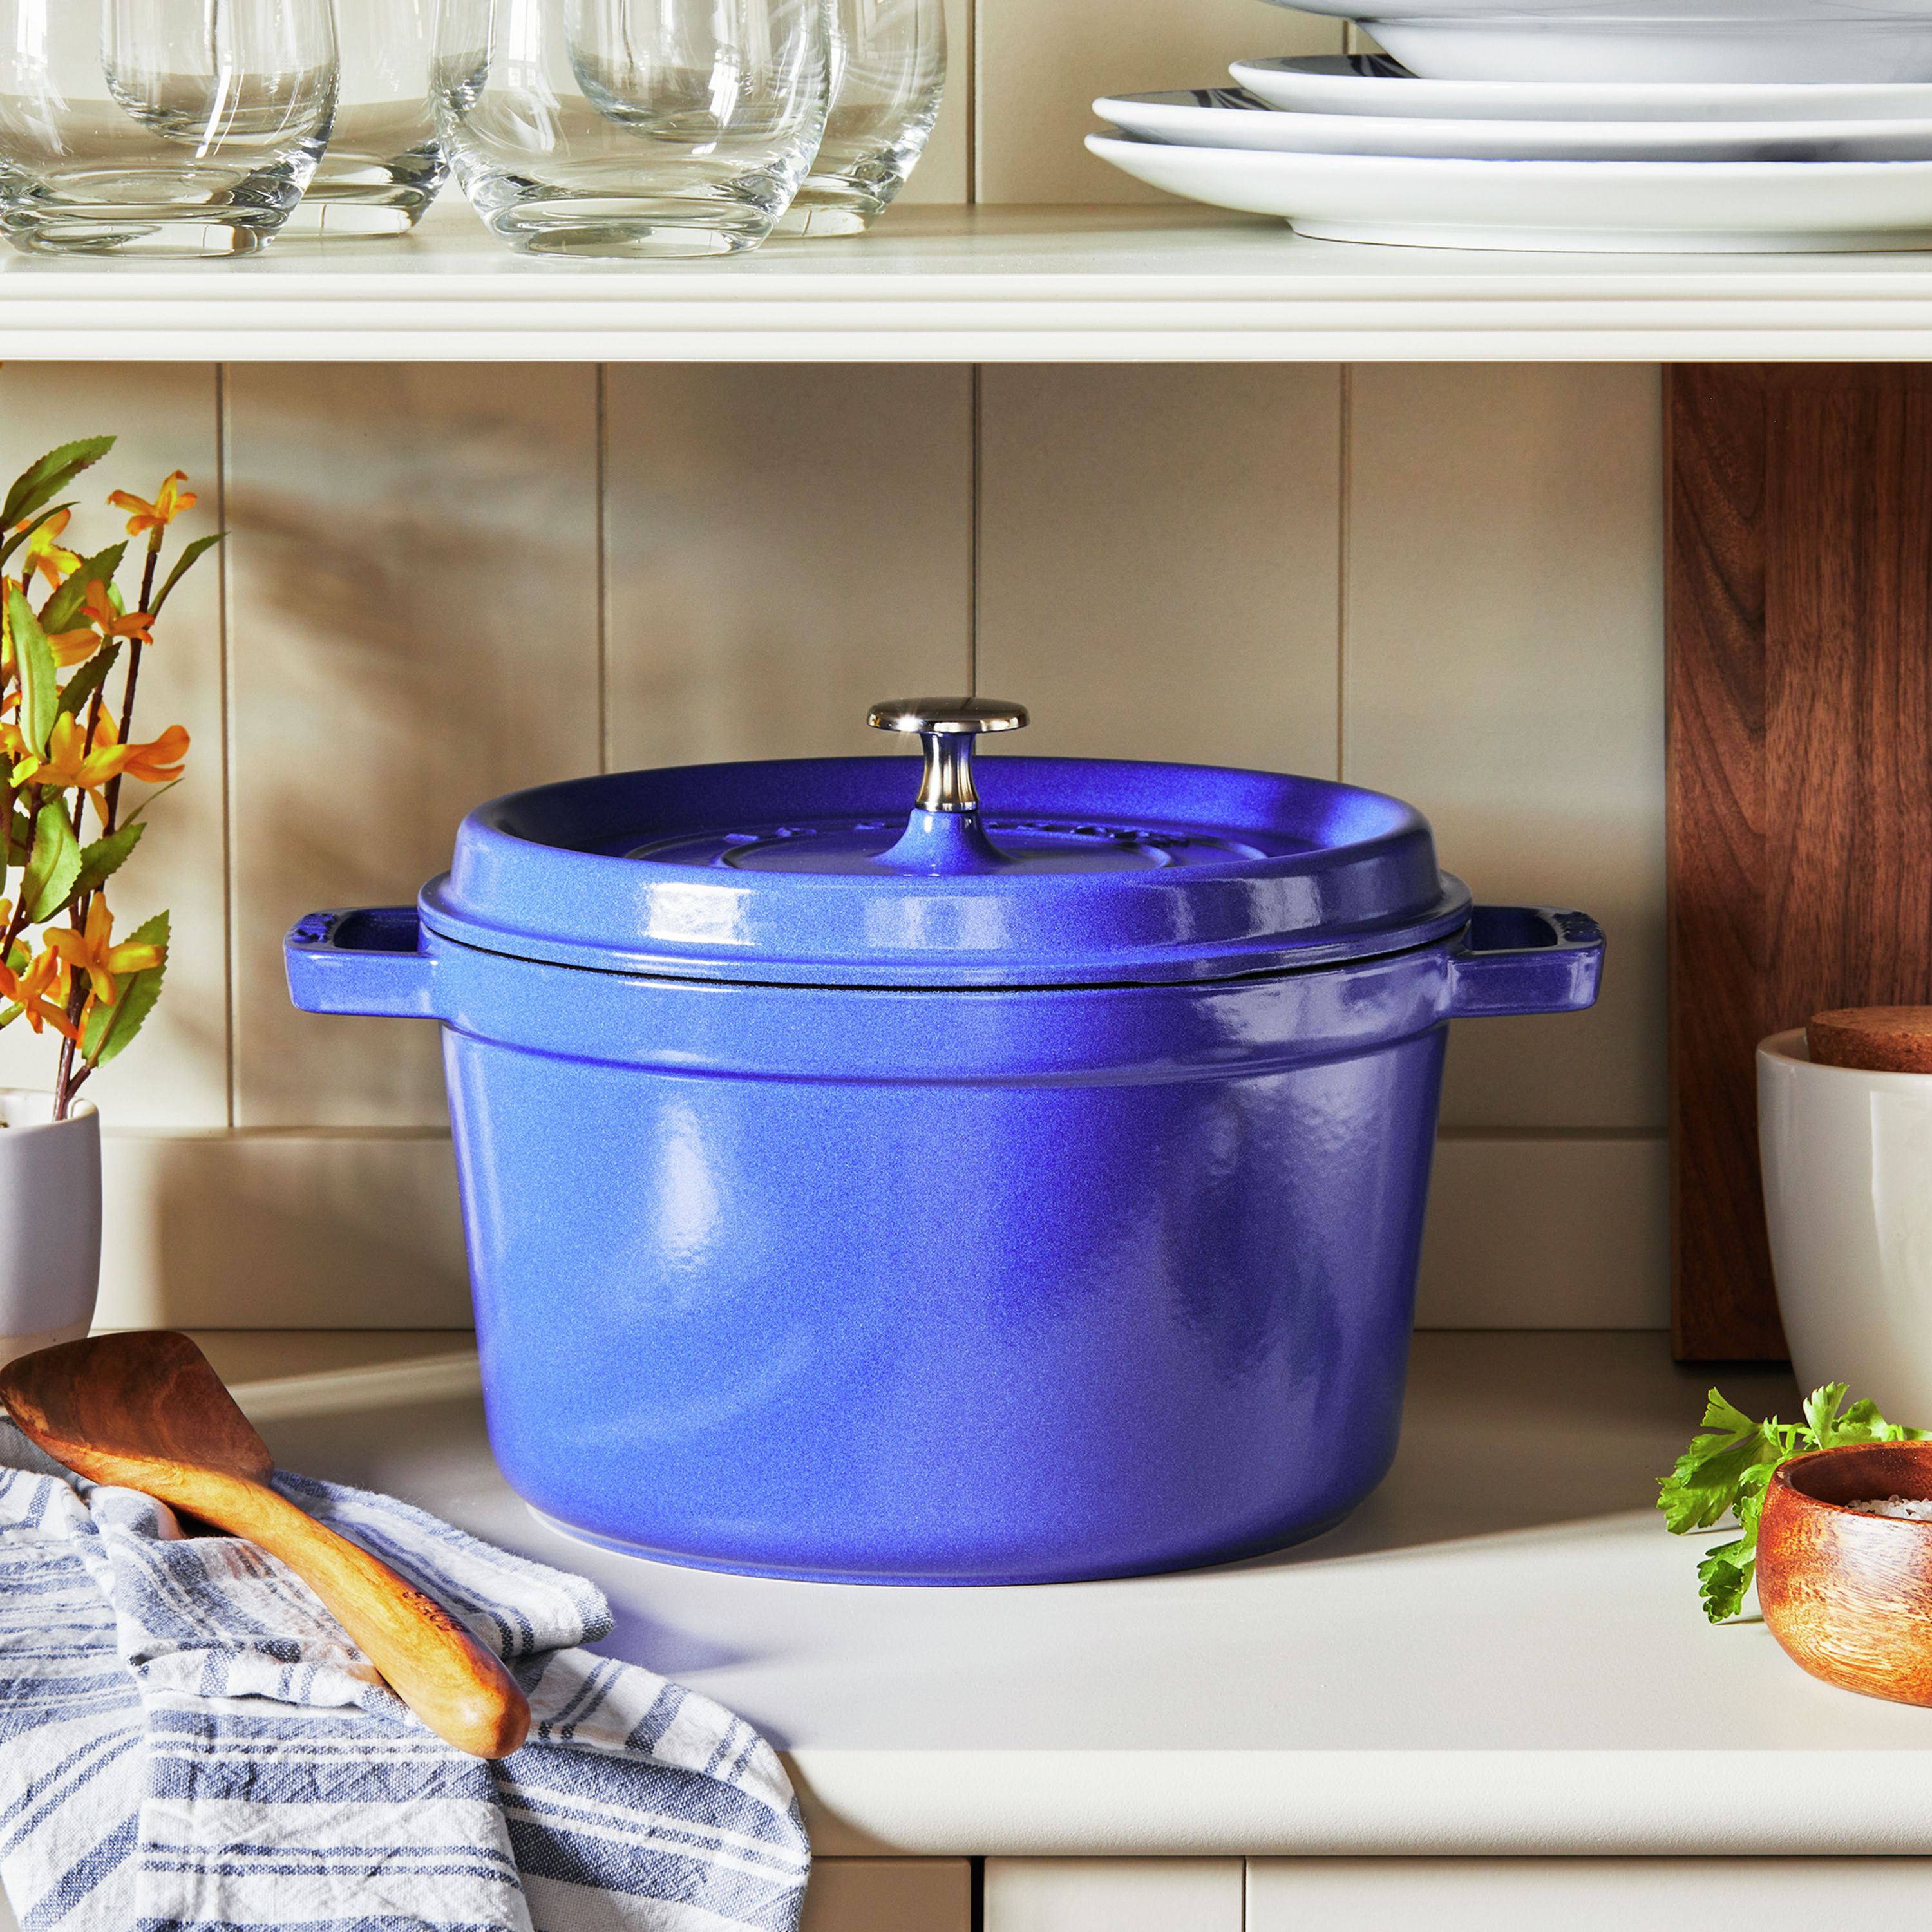 Shop Staub's Iconic 5-Quart Cocotte at Zwilling's End-Of-Year Sale